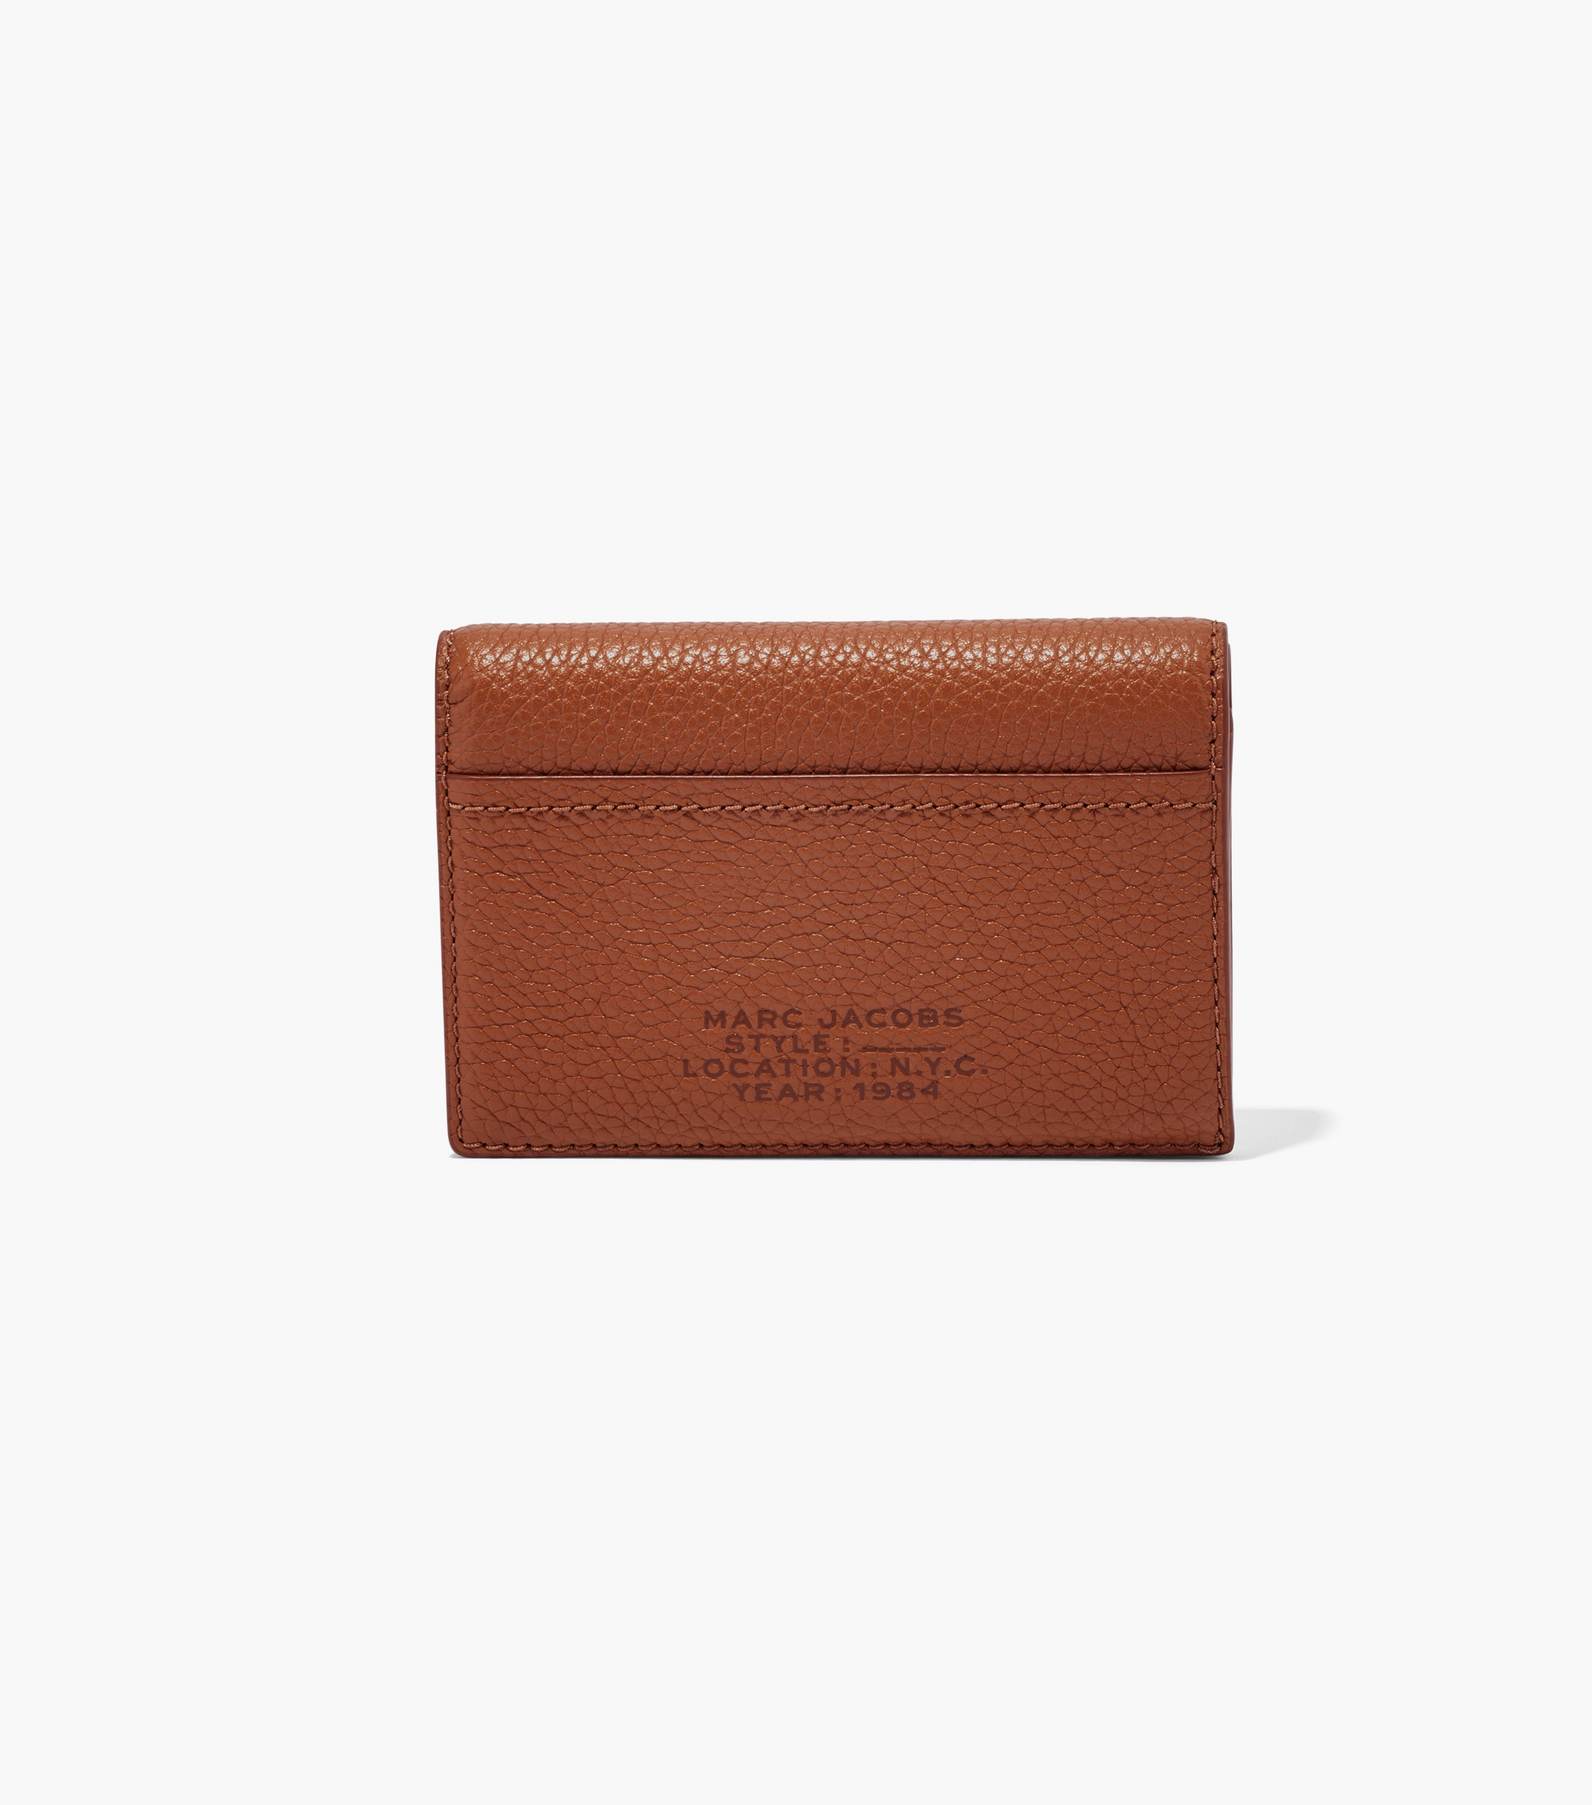 The Leather Small Bifold Wallet